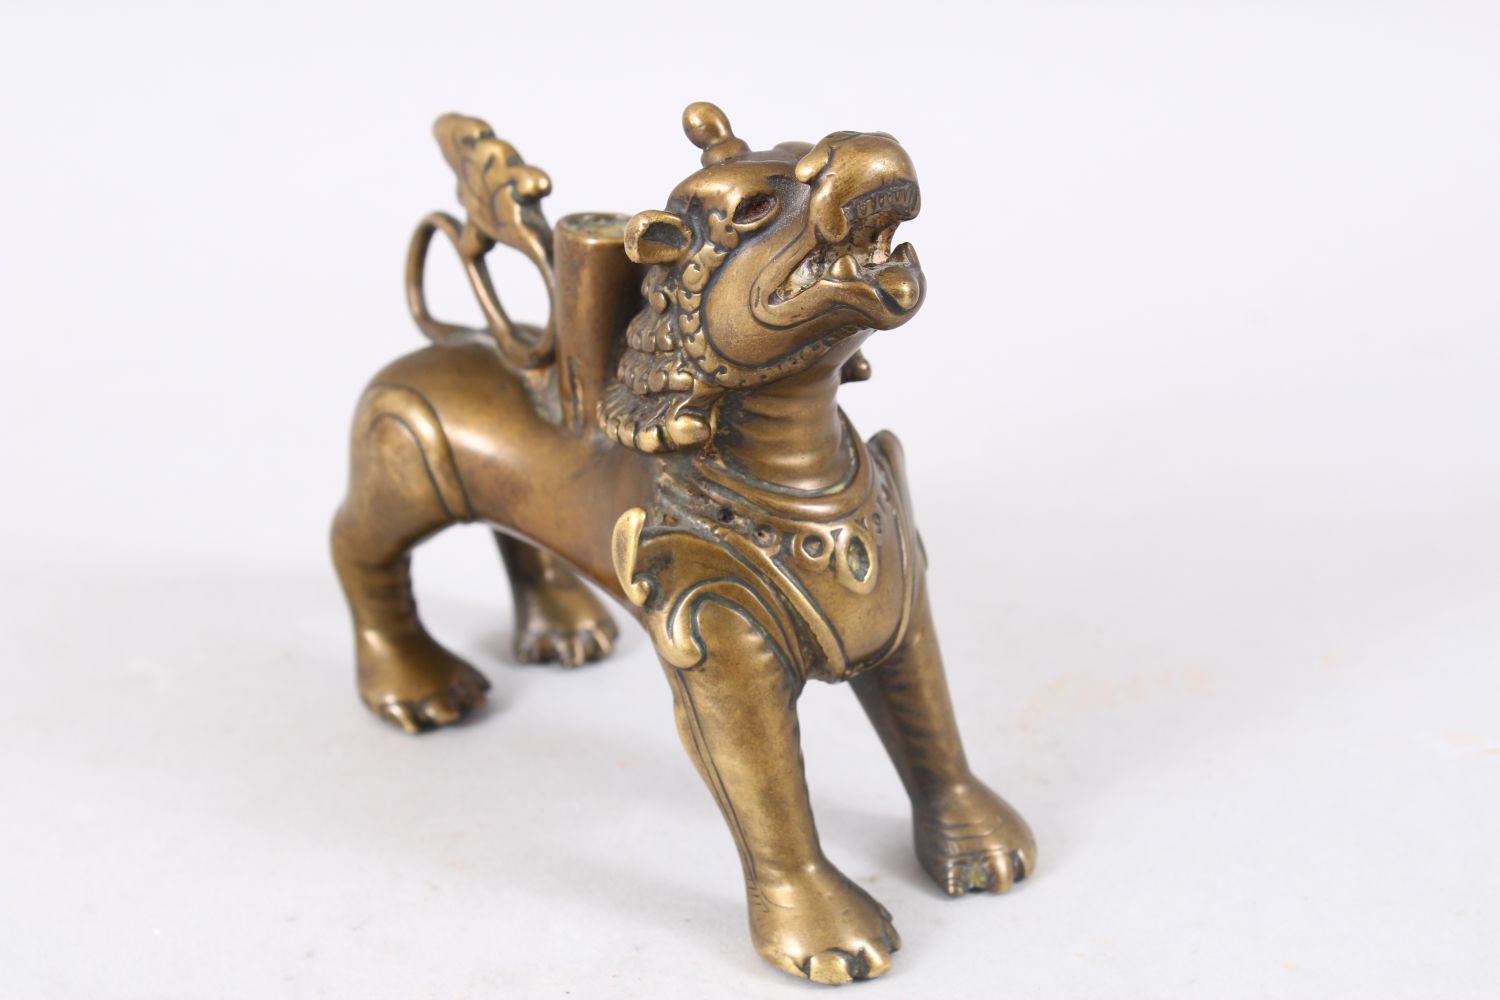 A FINE 15TH - 17TH CENTURY TIBETAN BRONZE FIGURE OF A LION / INCENSE, stood in a striking pose, 11cm - Image 2 of 4